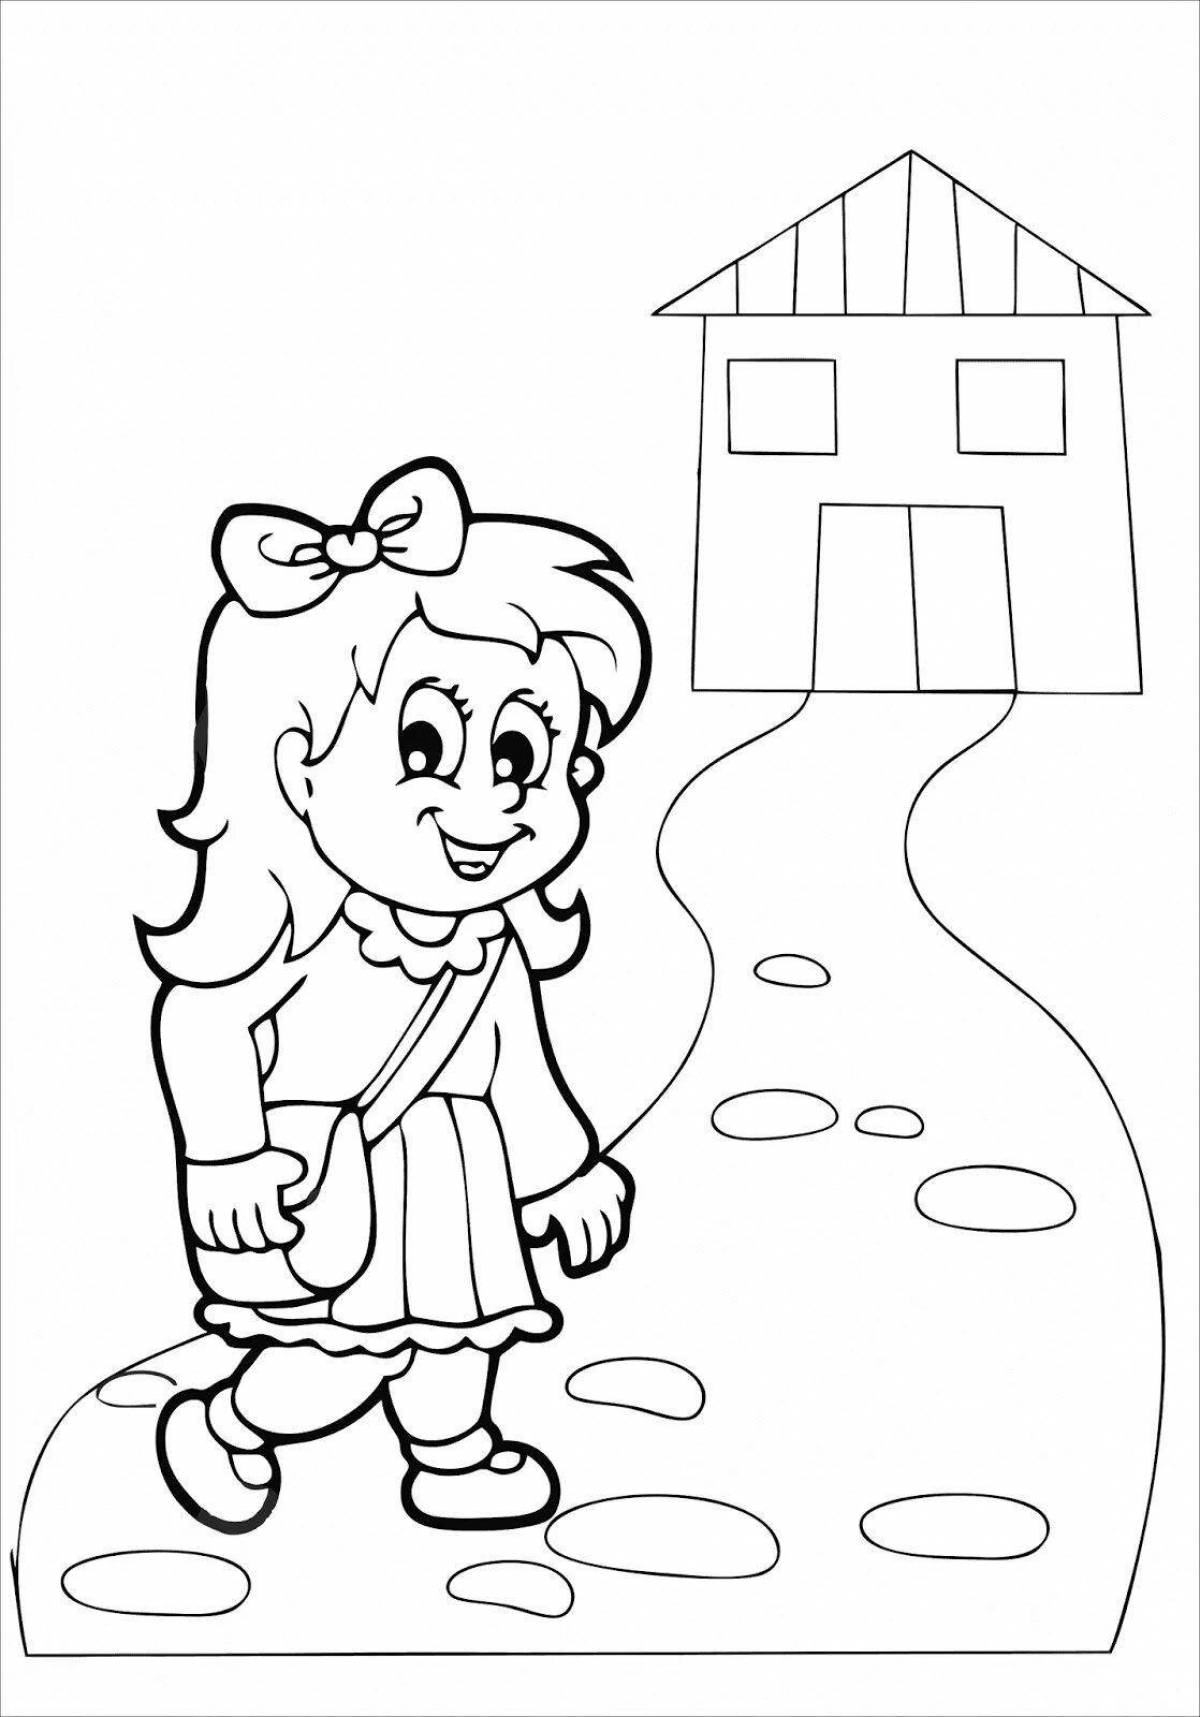 Sophisticated way home coloring page